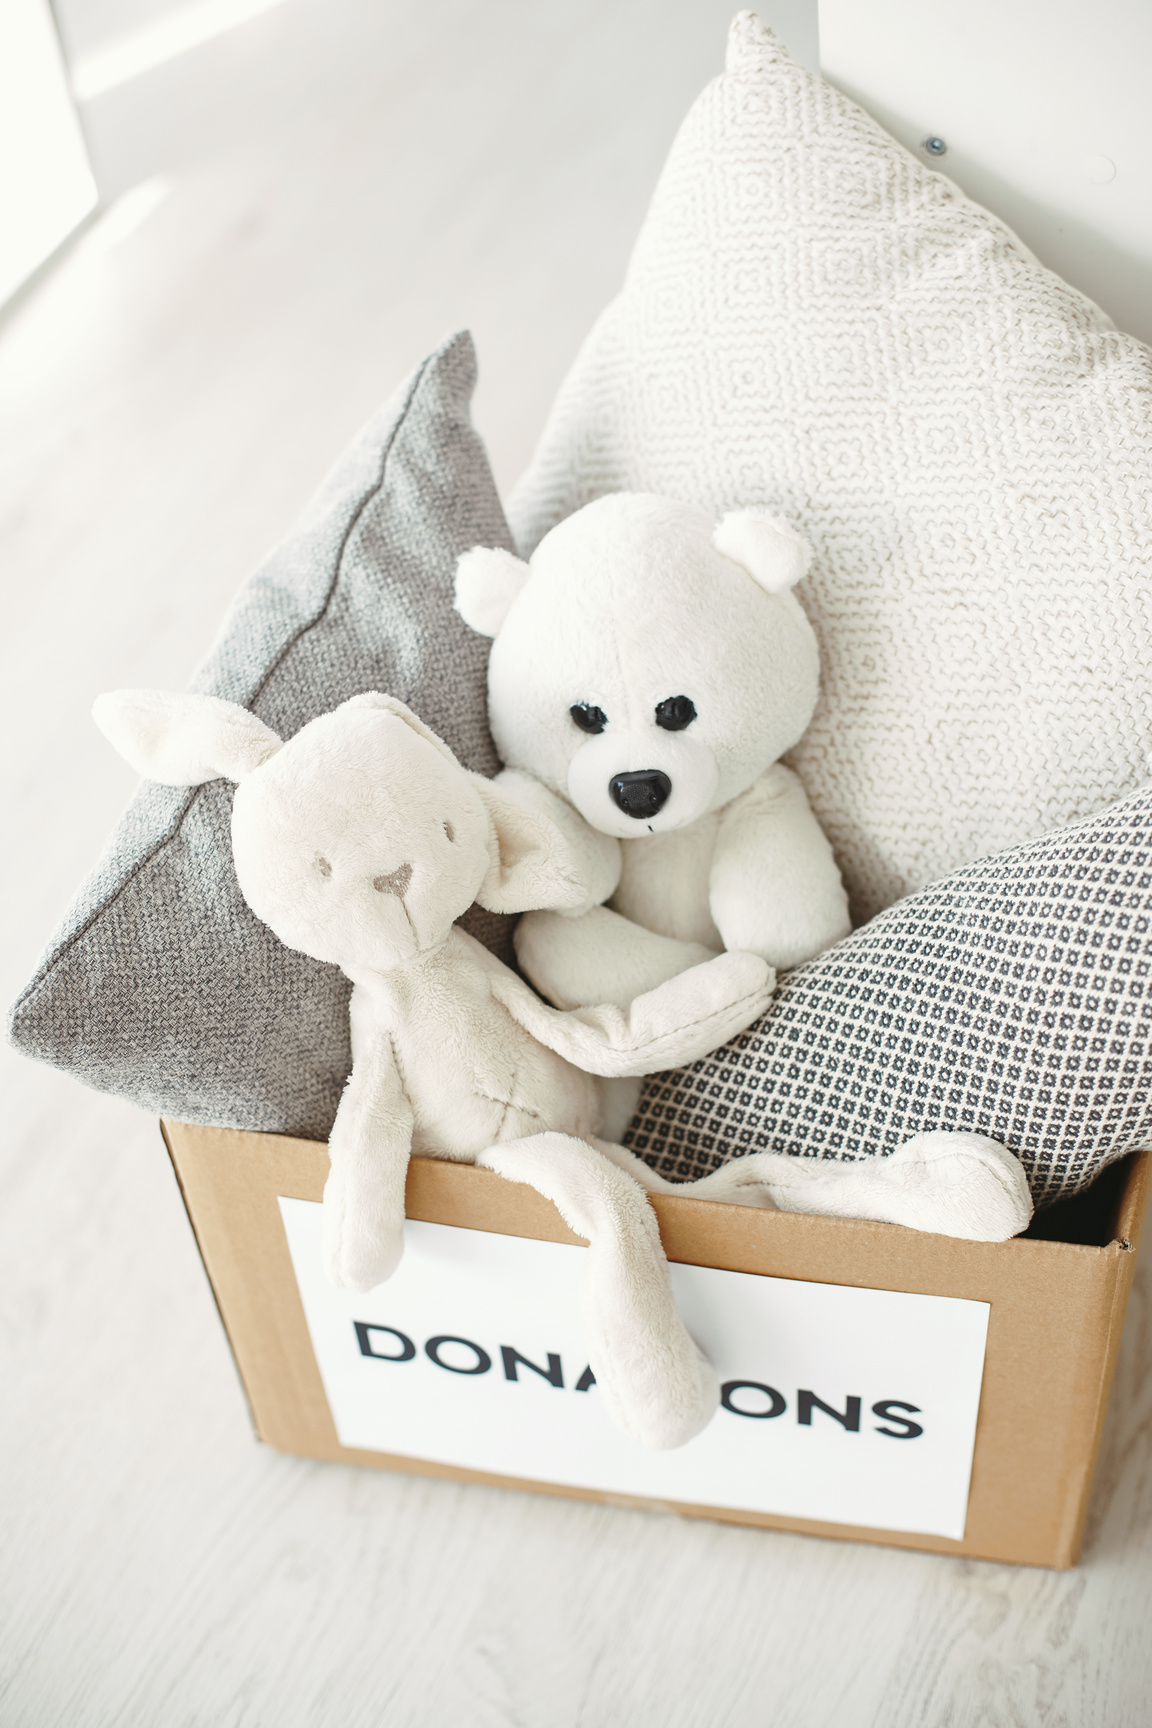 A Box of Donations with Pillows and Stuffed Animals